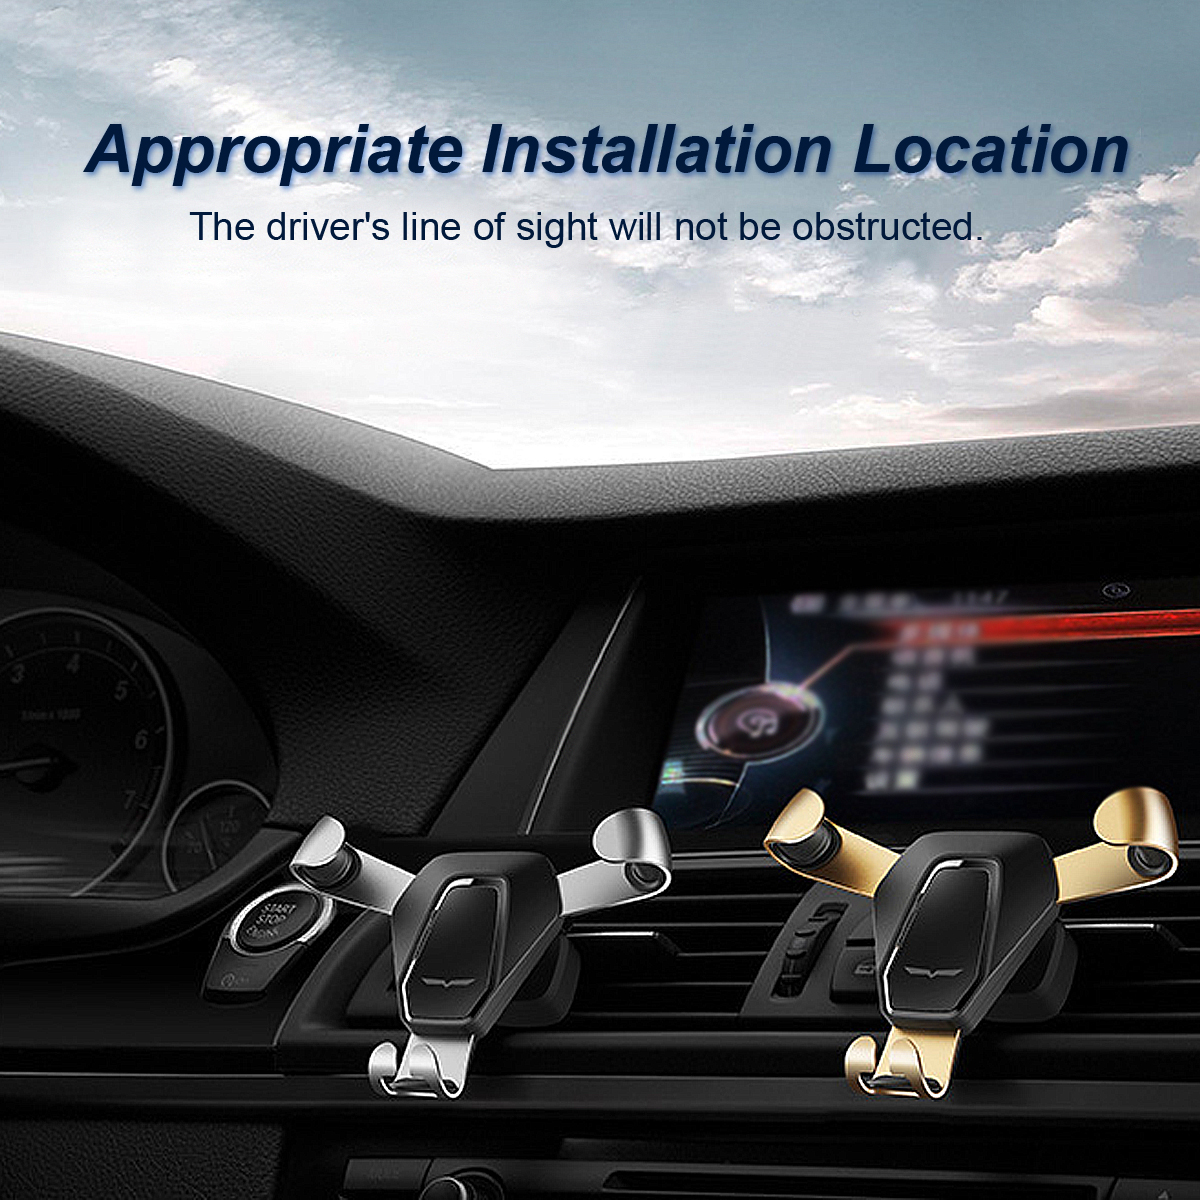 360-Degree-Rotation-Metal-Gravity-Auto-Lock-Holder-Car-Air-Vent-Mount-Phone-Stand-Outlet-Bracket-1238698